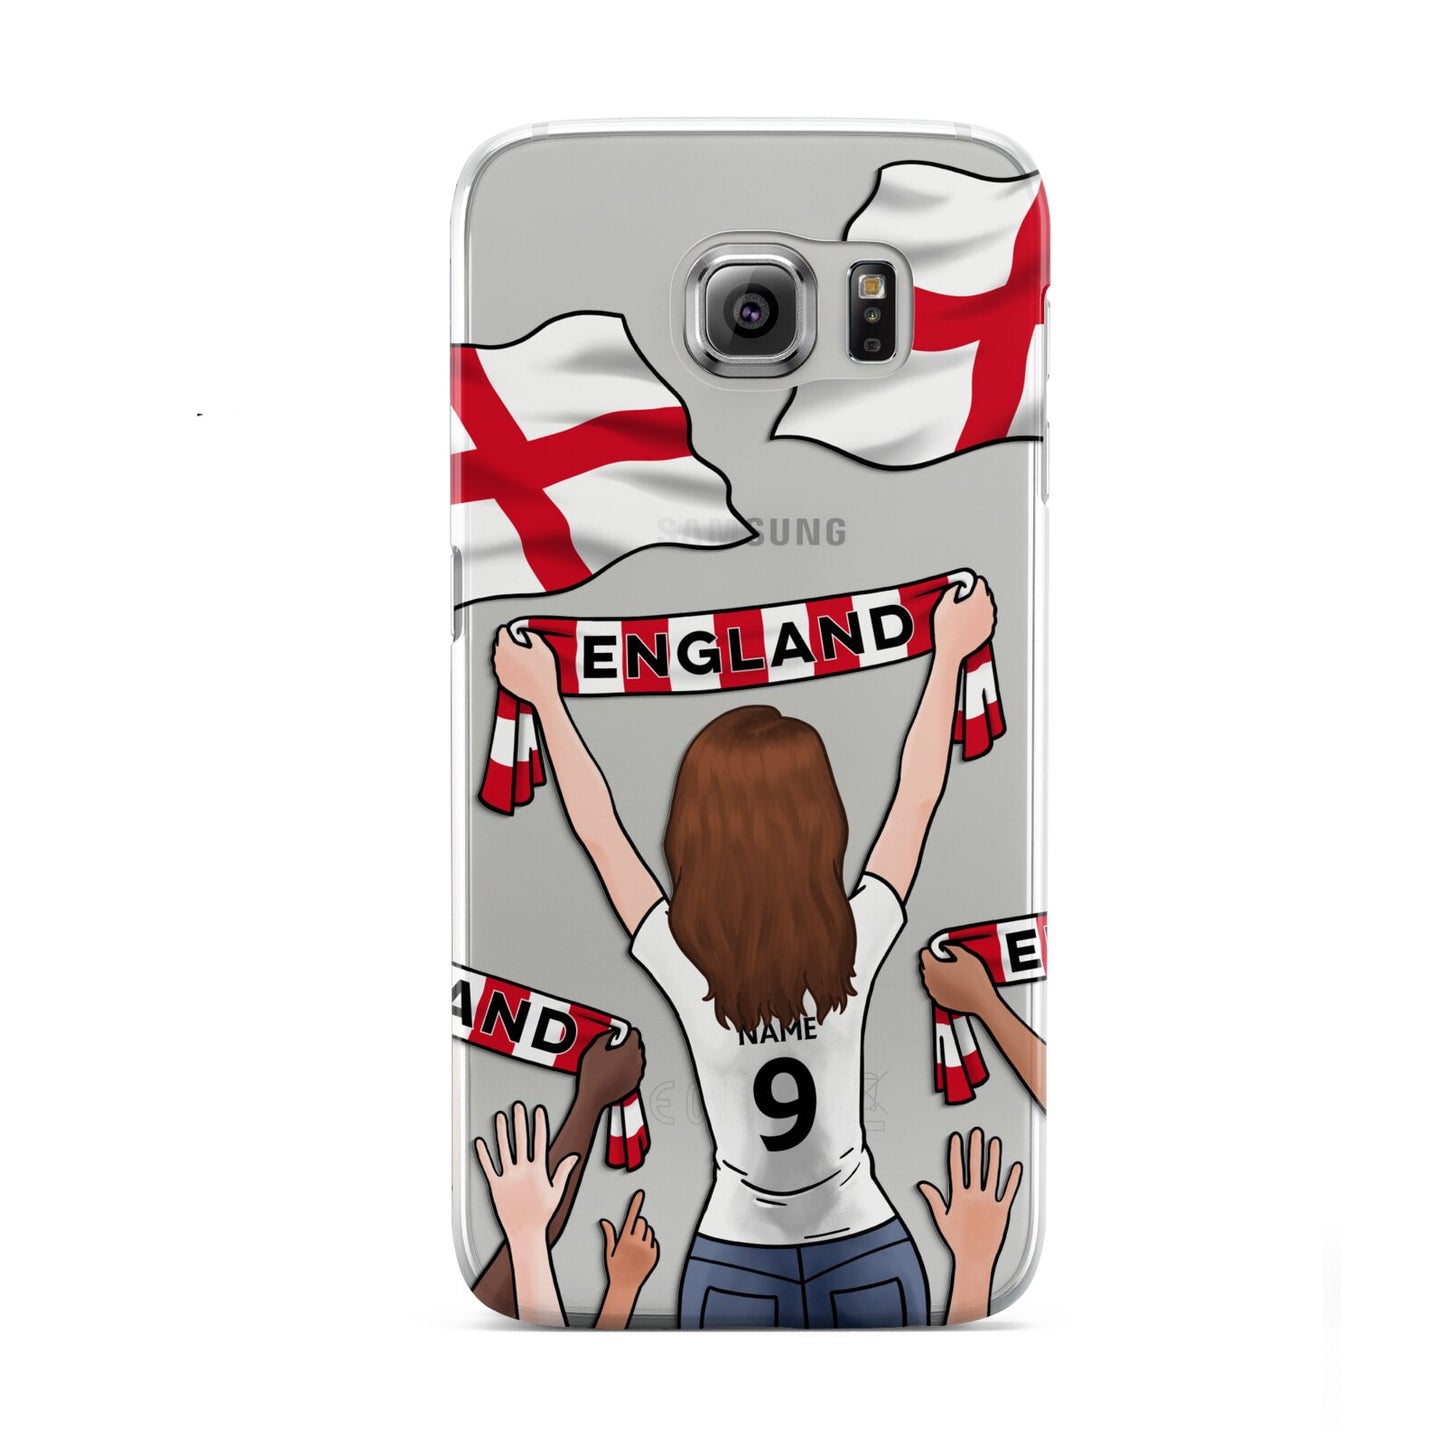 Football Supporter Personalised Samsung Galaxy S6 Case